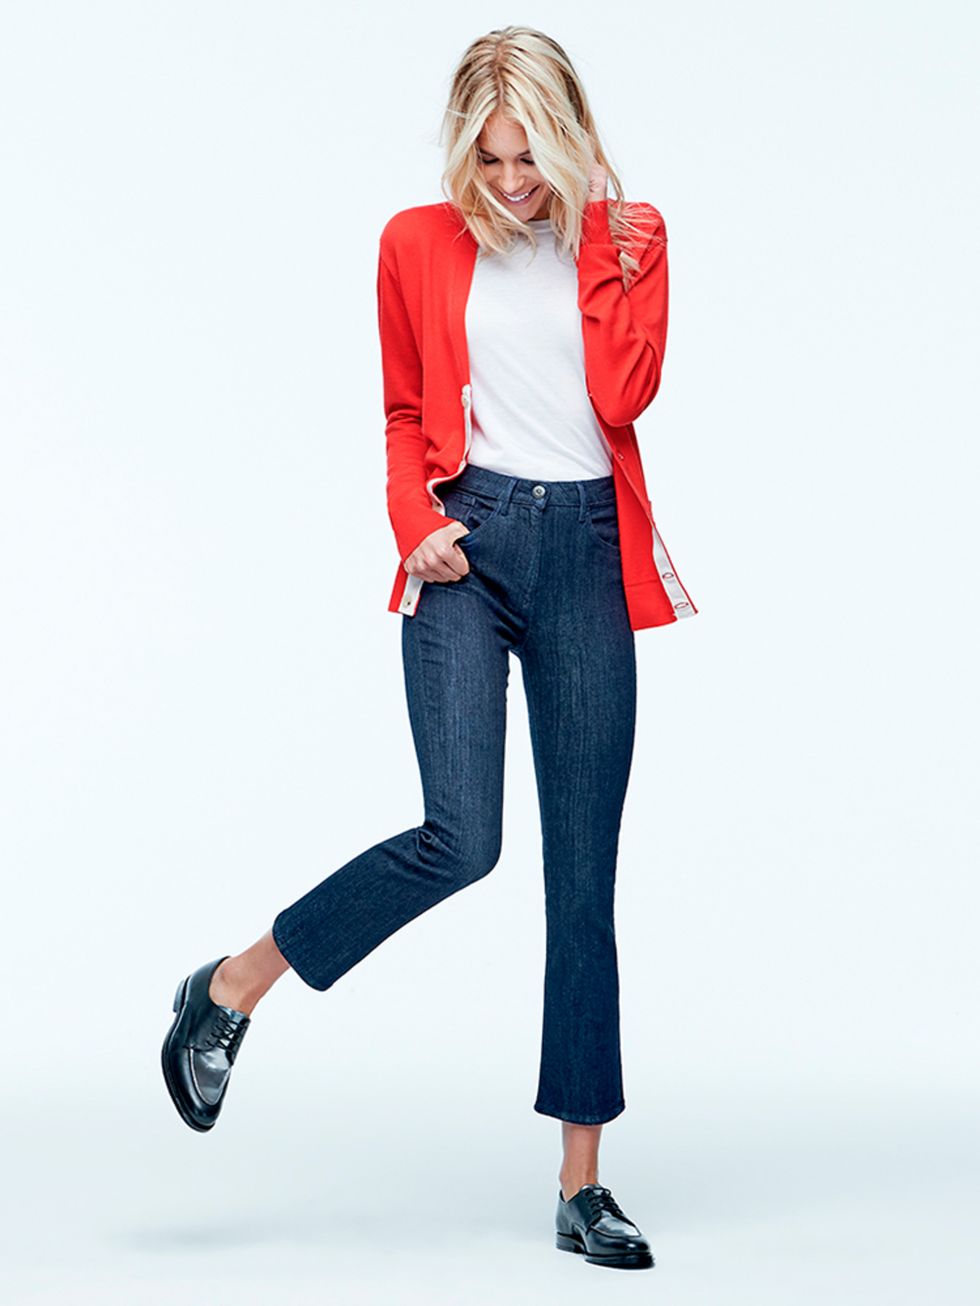 <p><strong>Shopbop / The Principle Collection</strong></p>

<p>Online retailer Shopbop have launched The Principle Collection, in collaboration with some of our favourite denim brands, including MiH, AG, Mother, Frame and J Brand. Our favourites are these